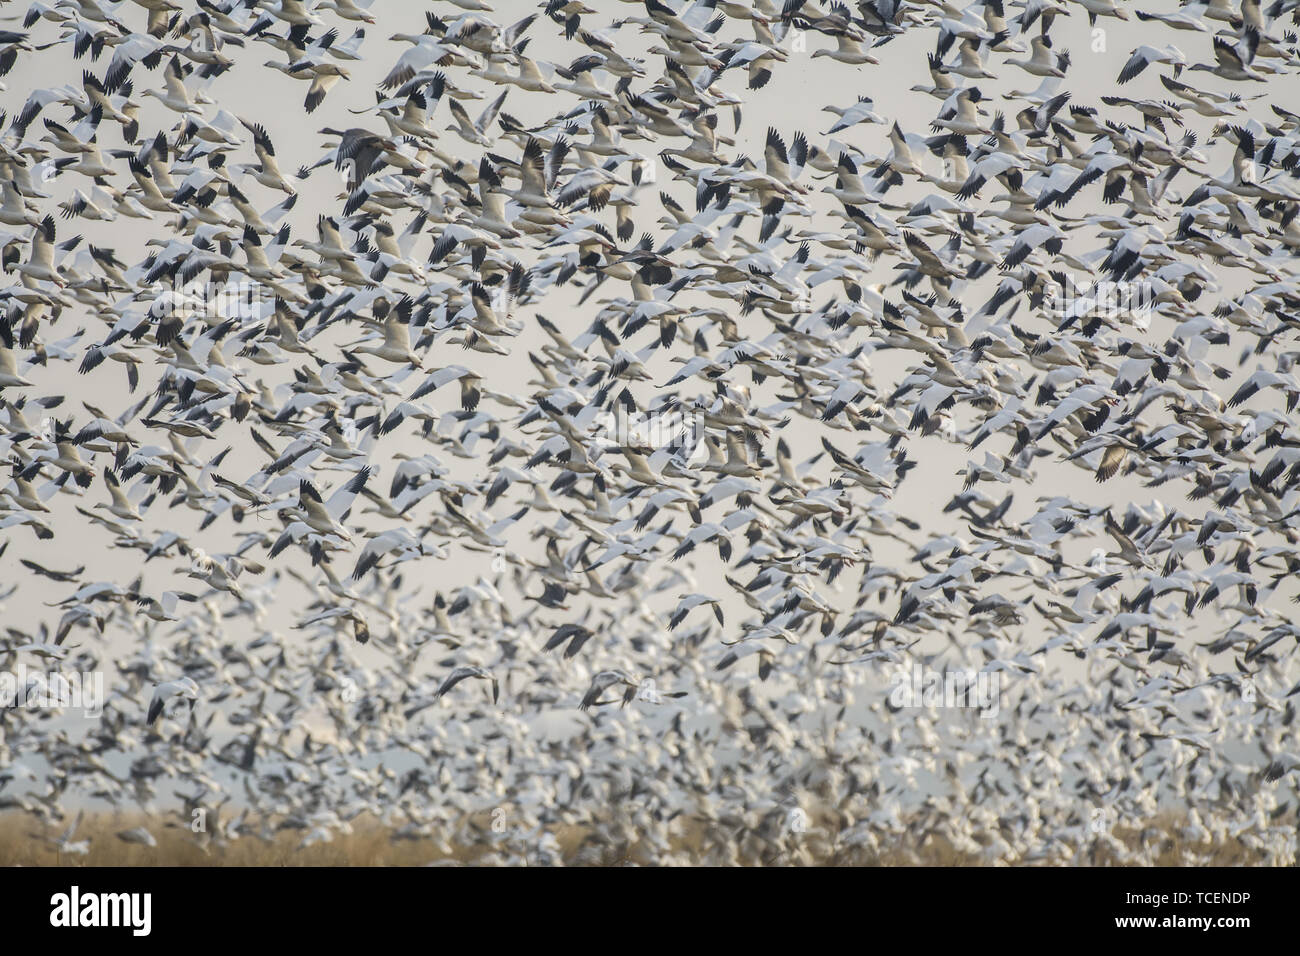 A massive flock of snow geese taking flight. Stock Photo